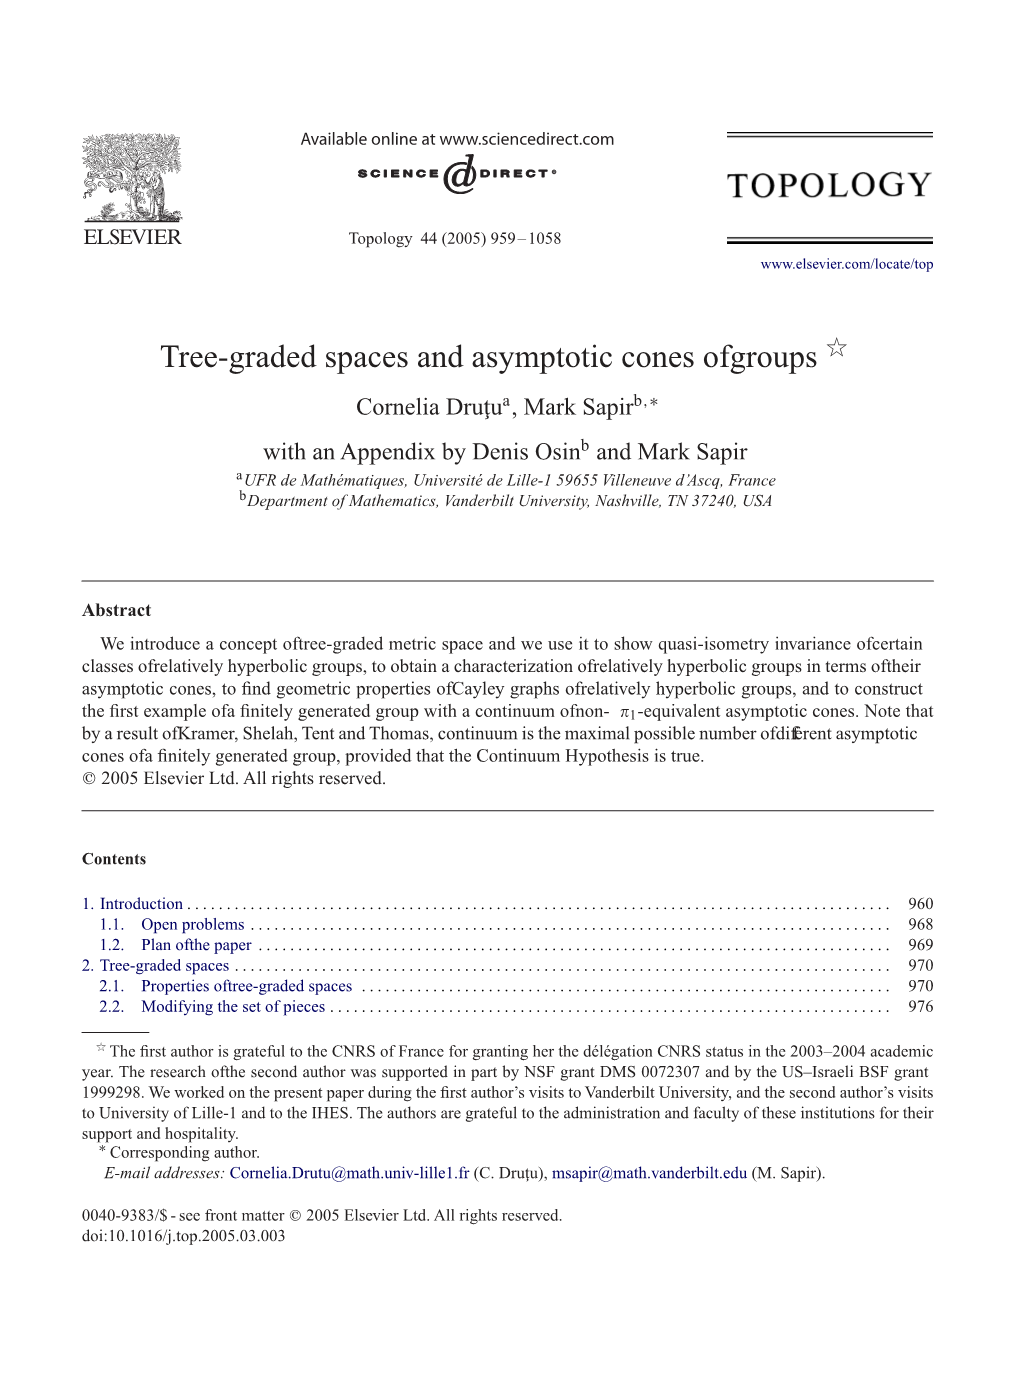 Tree-Graded Spaces and Asymptotic Cones of Groups